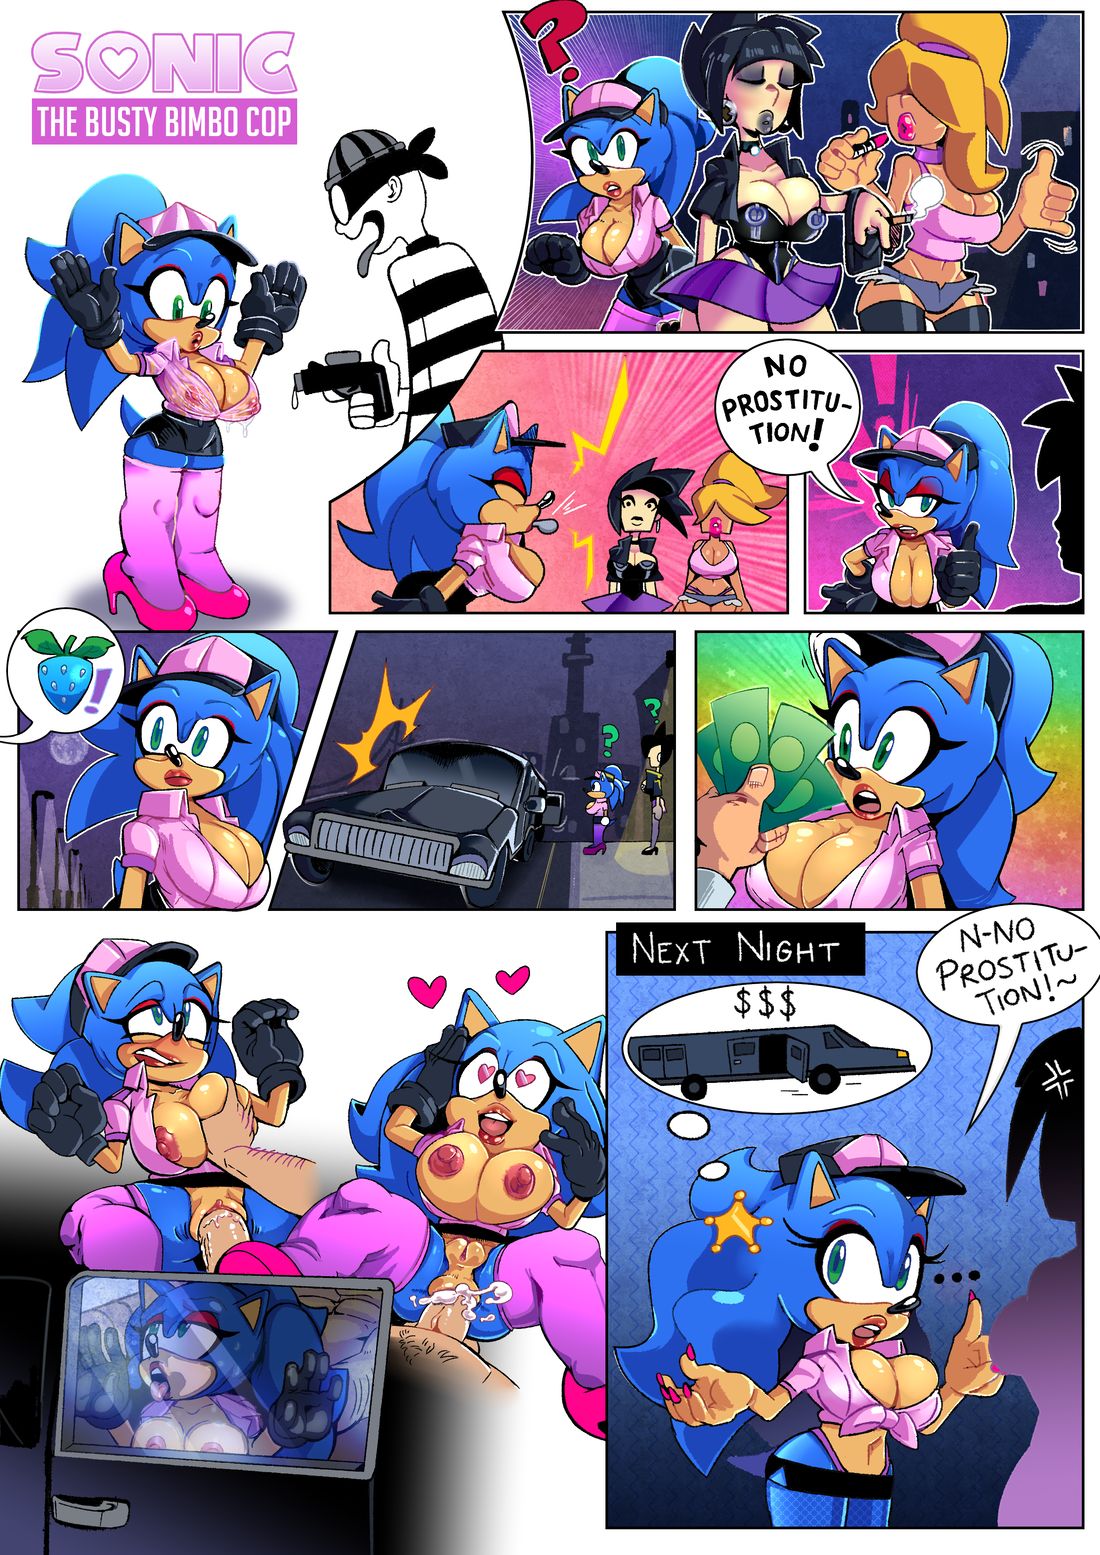 Sonic The Whore Cop Miss Phase 11